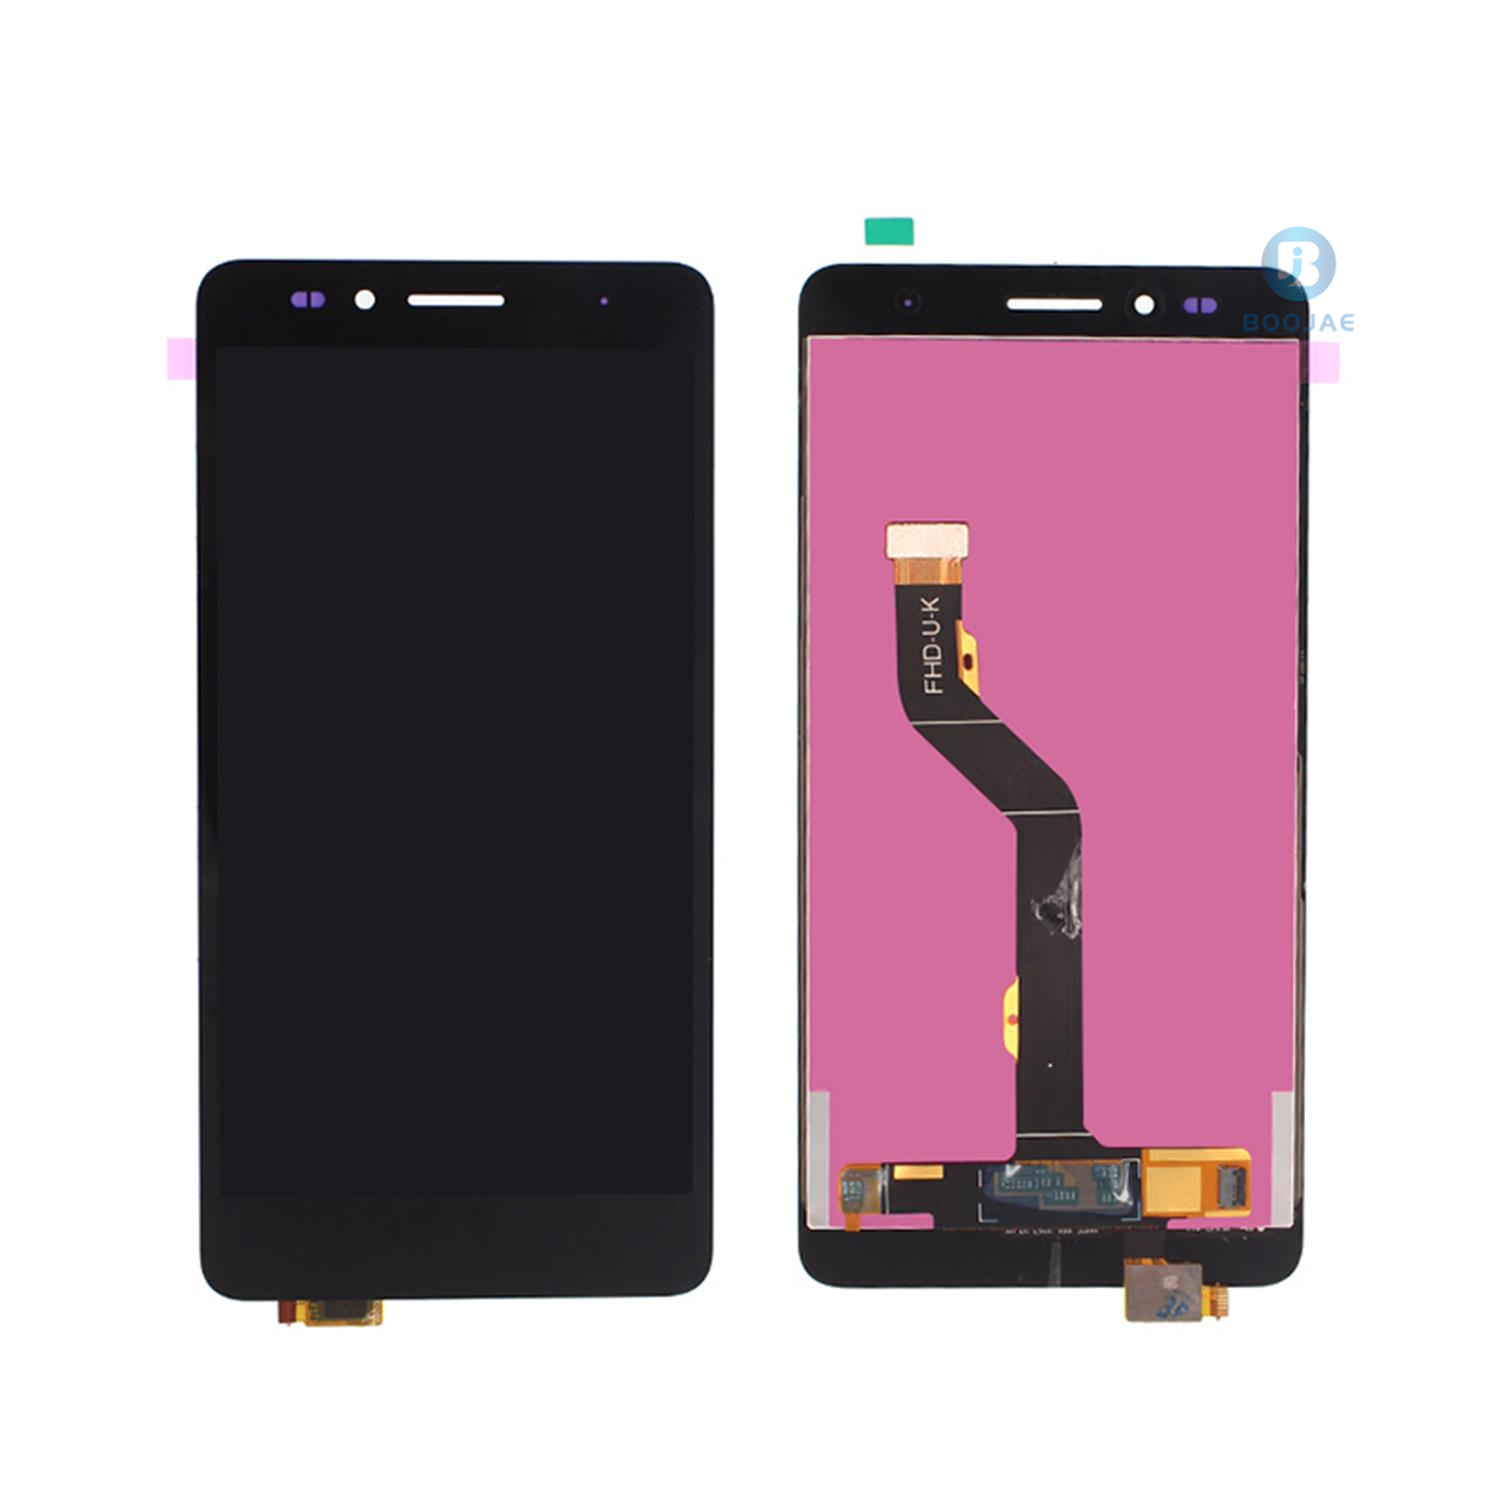 For Huawei Honor 5X LCD Screen Display and Touch Panel Digitizer Assembly Replacement